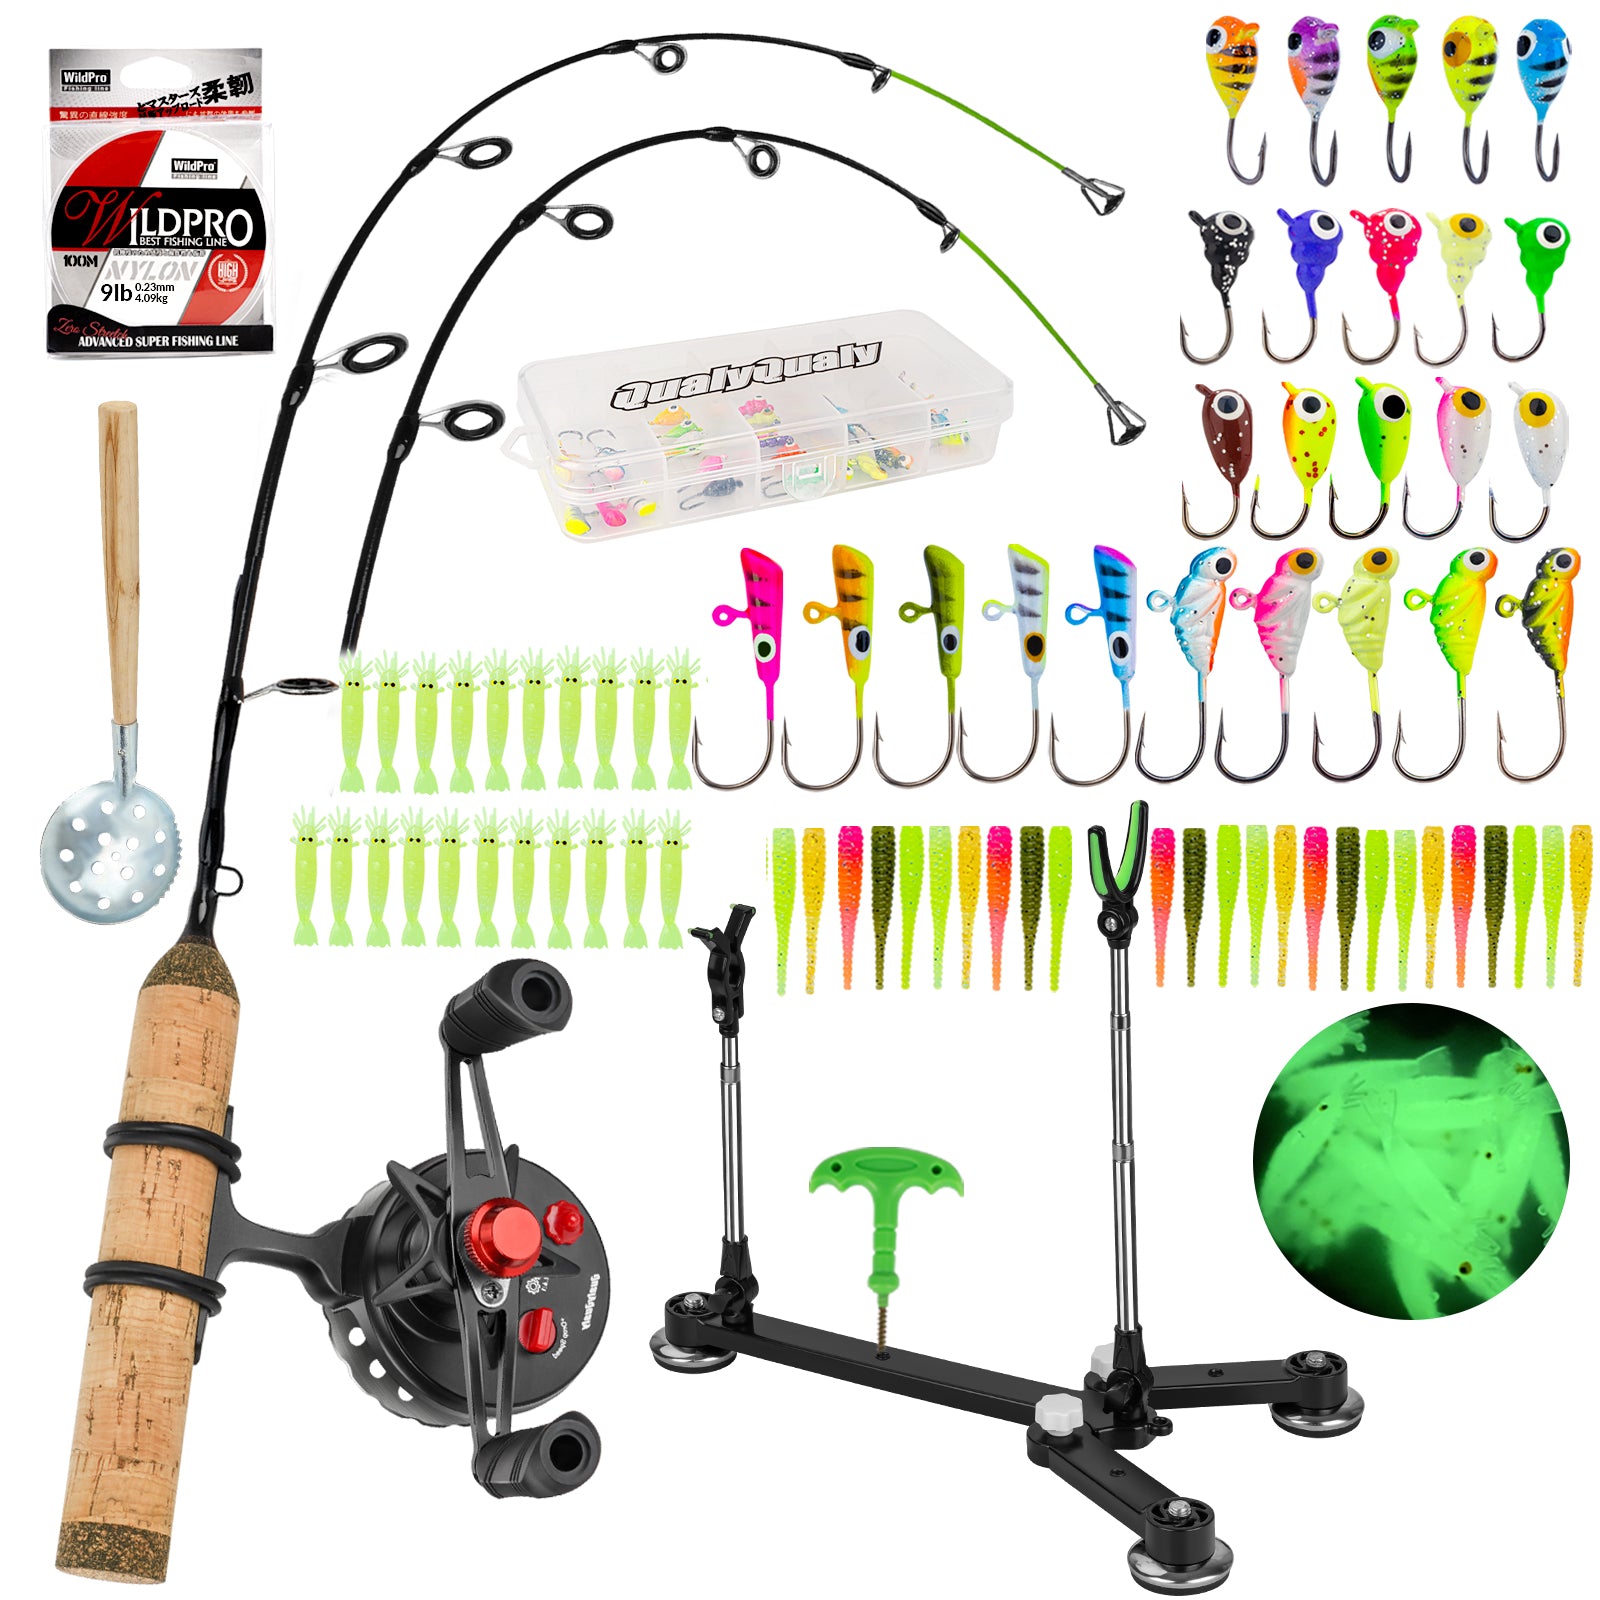 THKFISH Ice Fishing Gear Kit for Bass Trout